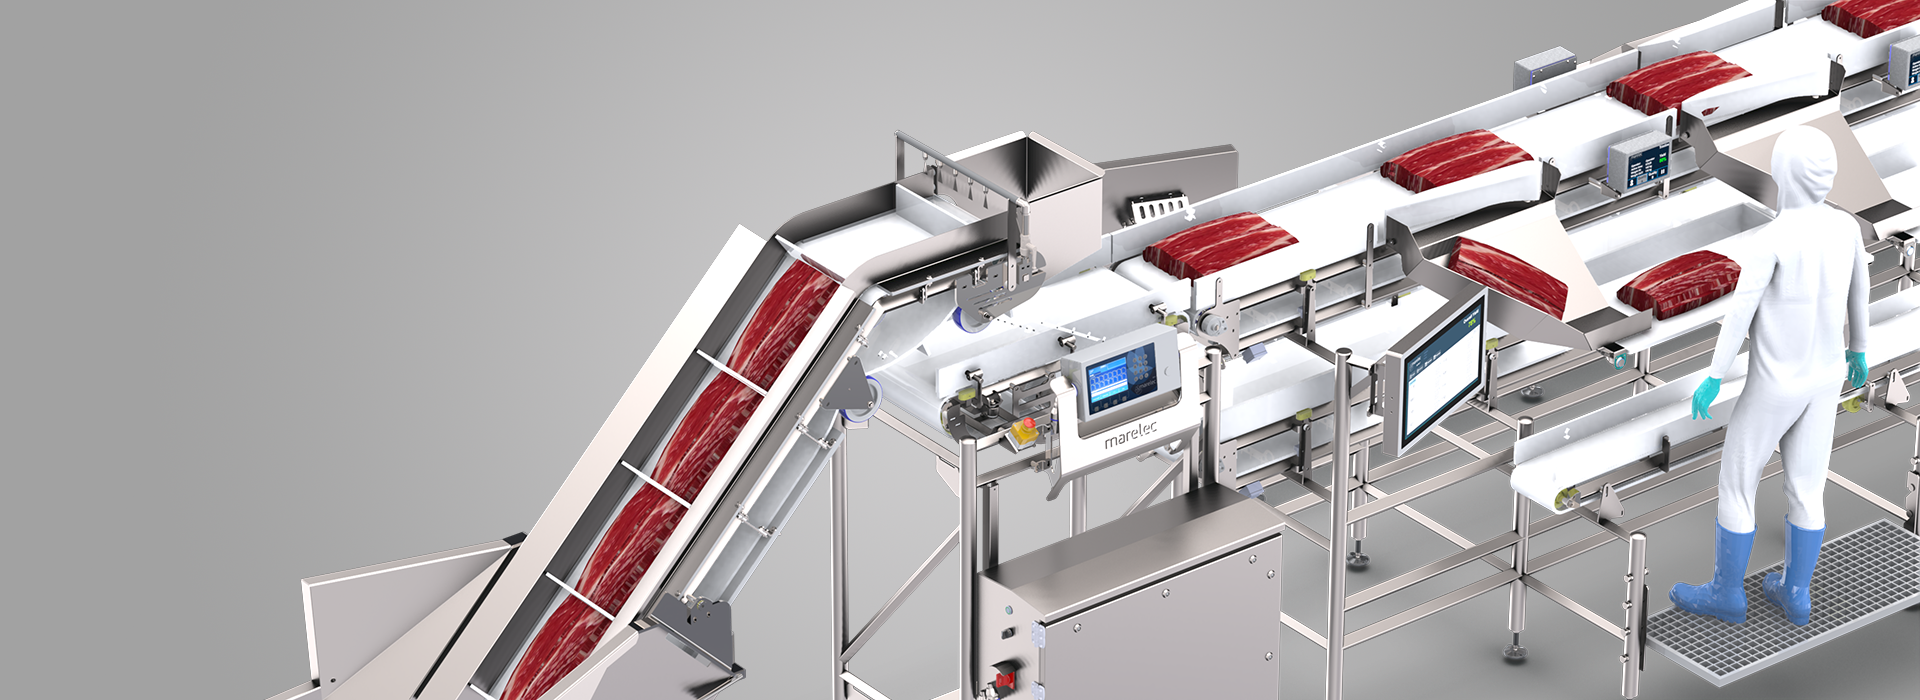 Intelligent meat trimming line monitoring of live yield, capacity and quality per operator